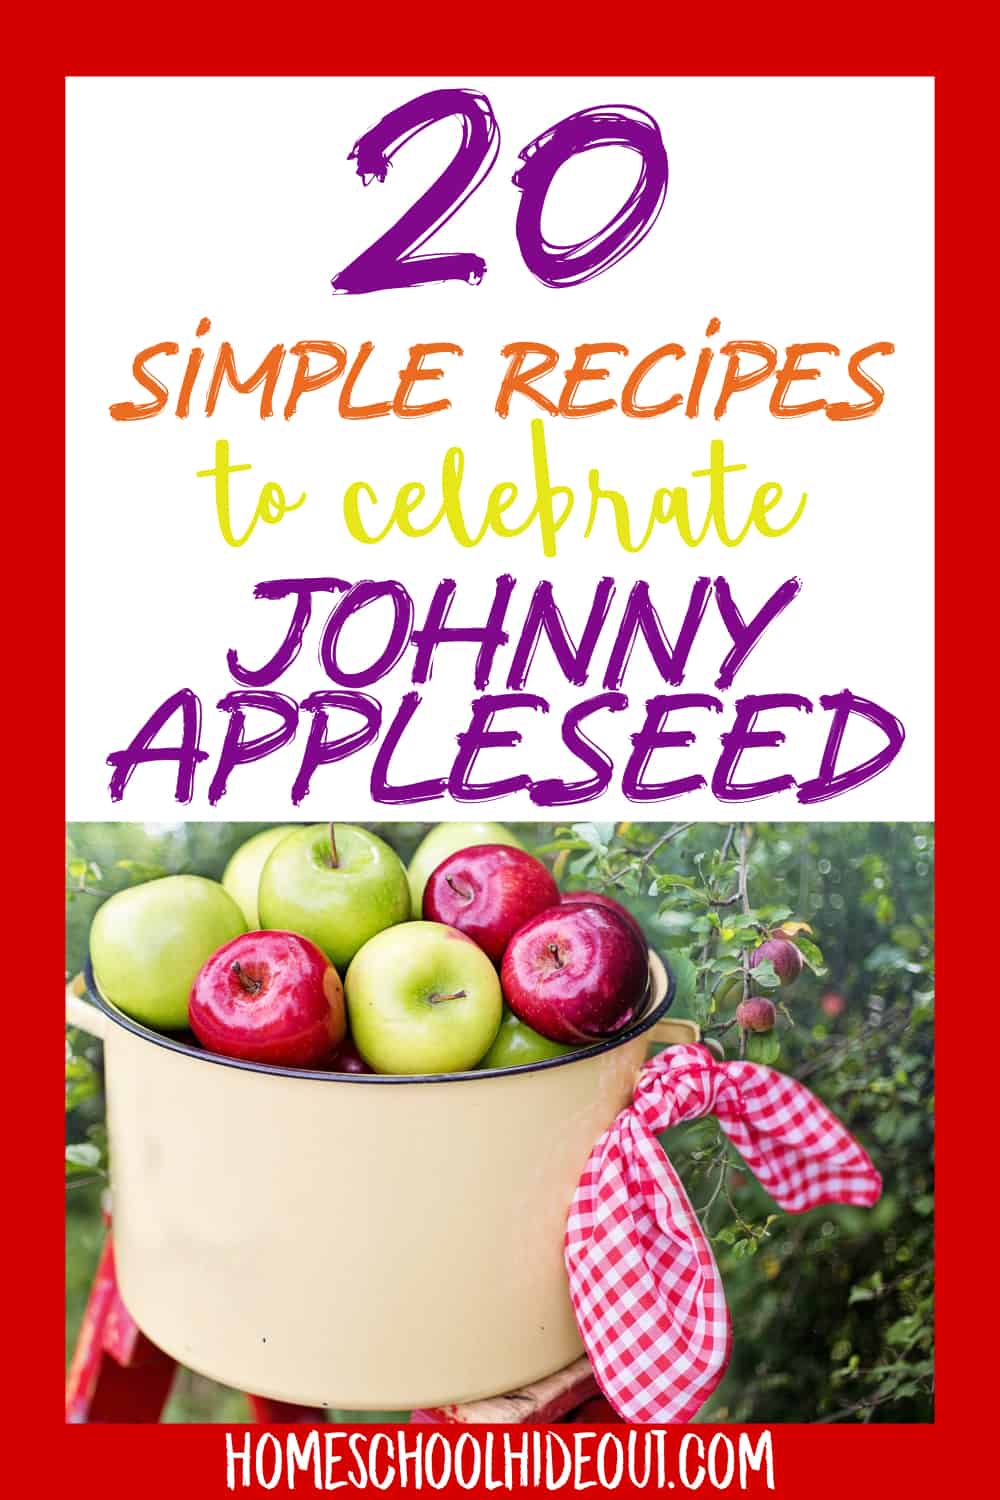 Celebrate September 8th with these super simple Johnny Appleseed recipes! They're so easy, kids can make them, too! #johnnyappleseed #kidsinthekitchen #simplerecipes #easyrecipes #apples #baking